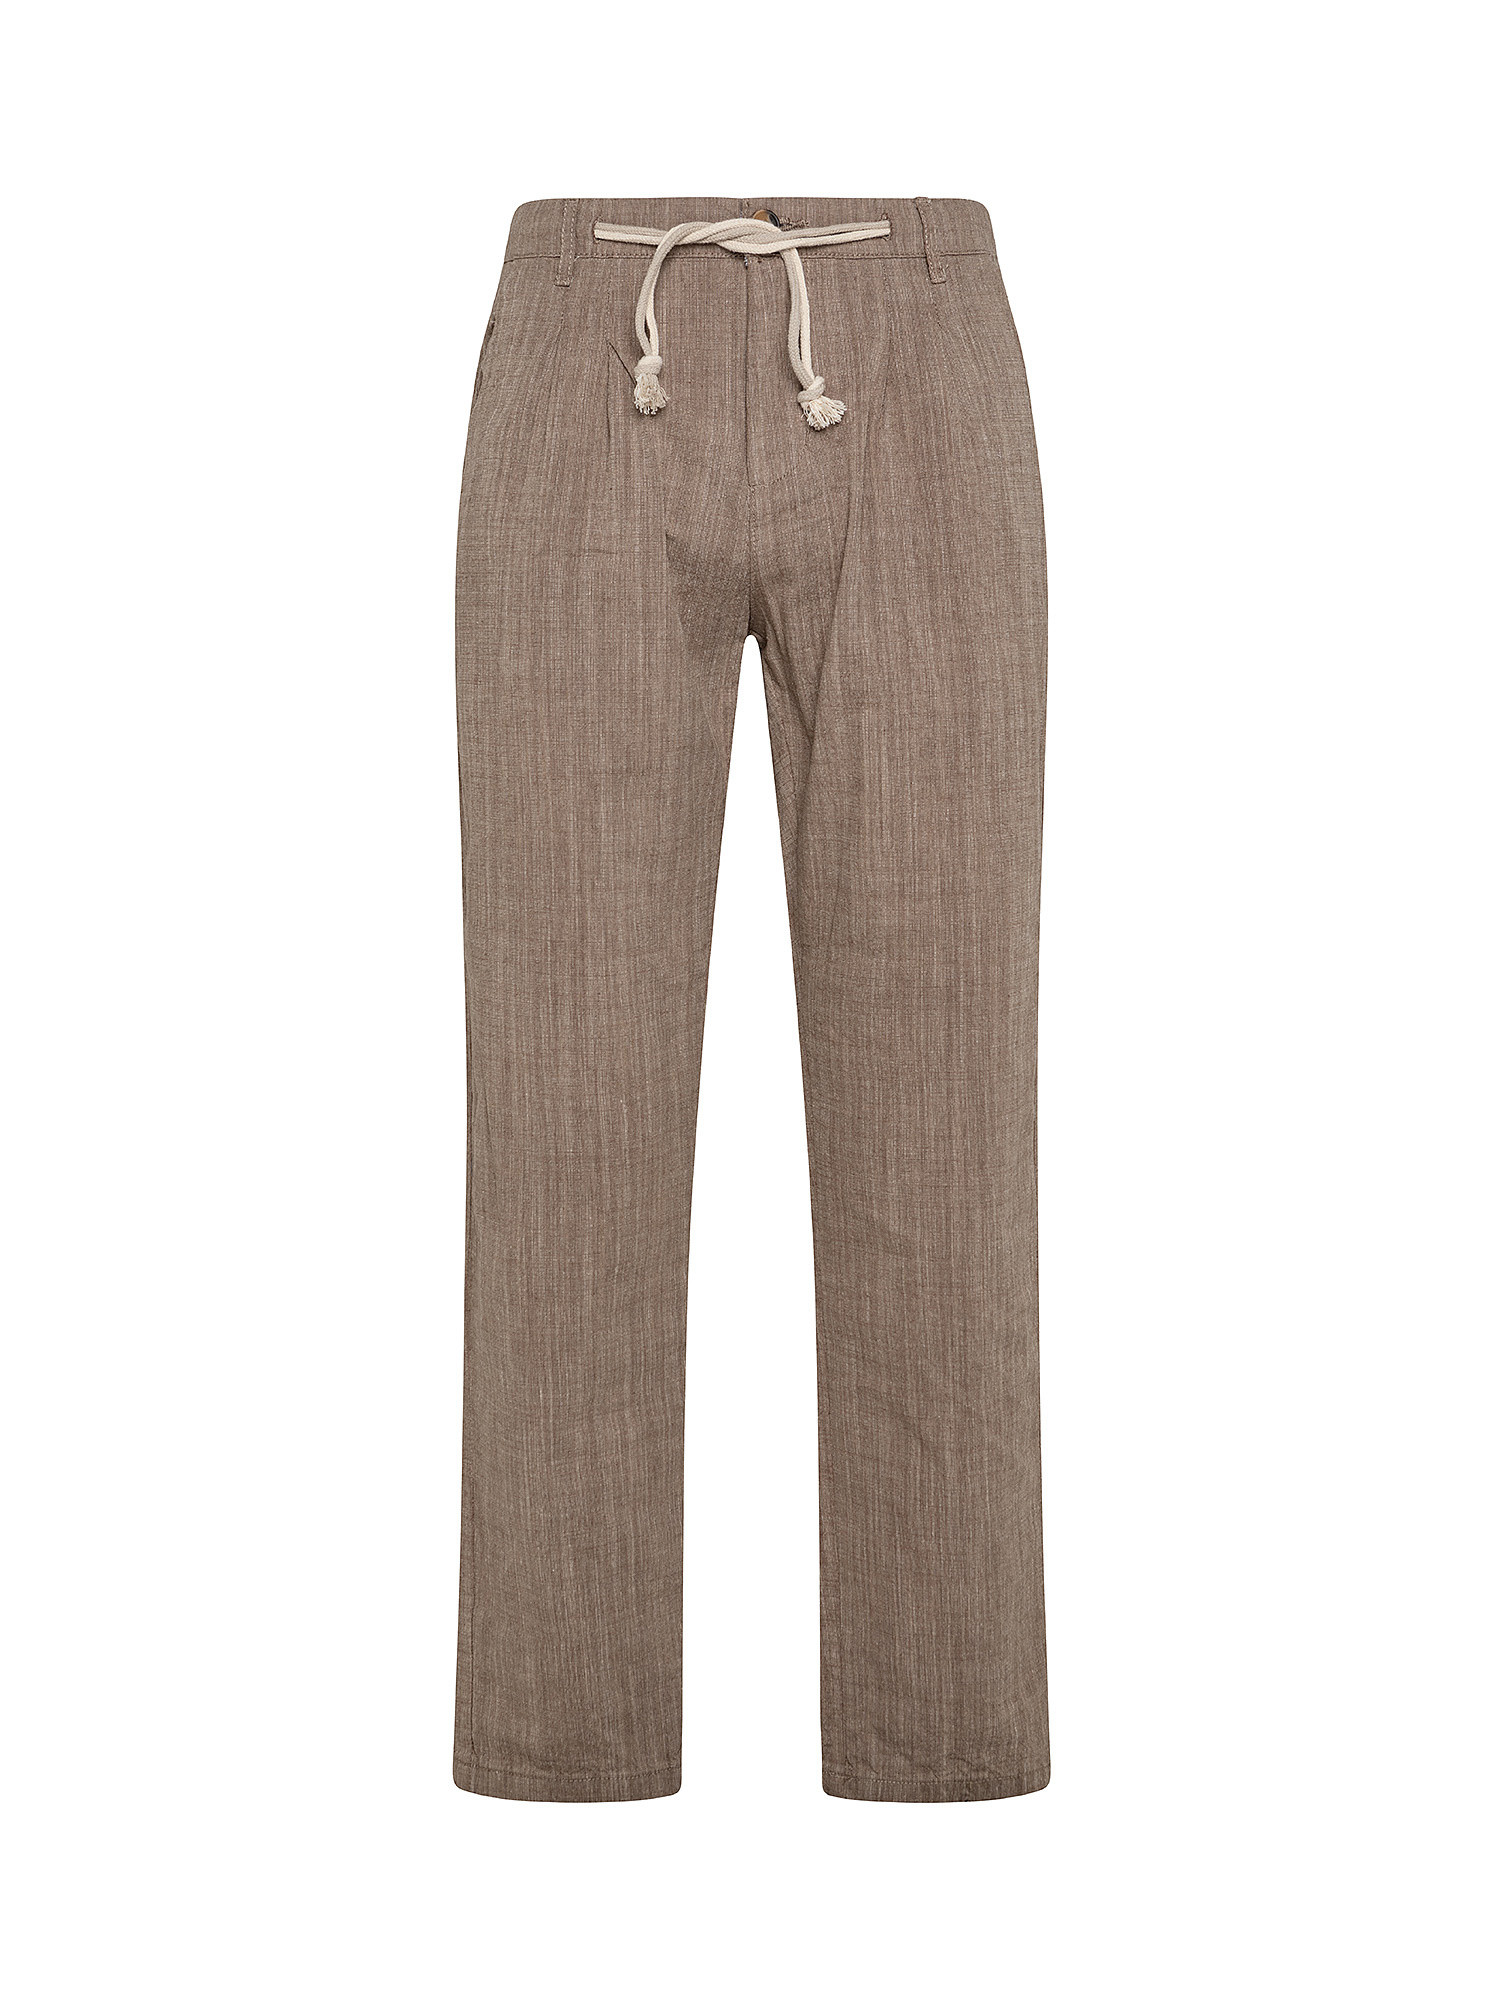 Pantalone con coulisse, Beige, large image number 0